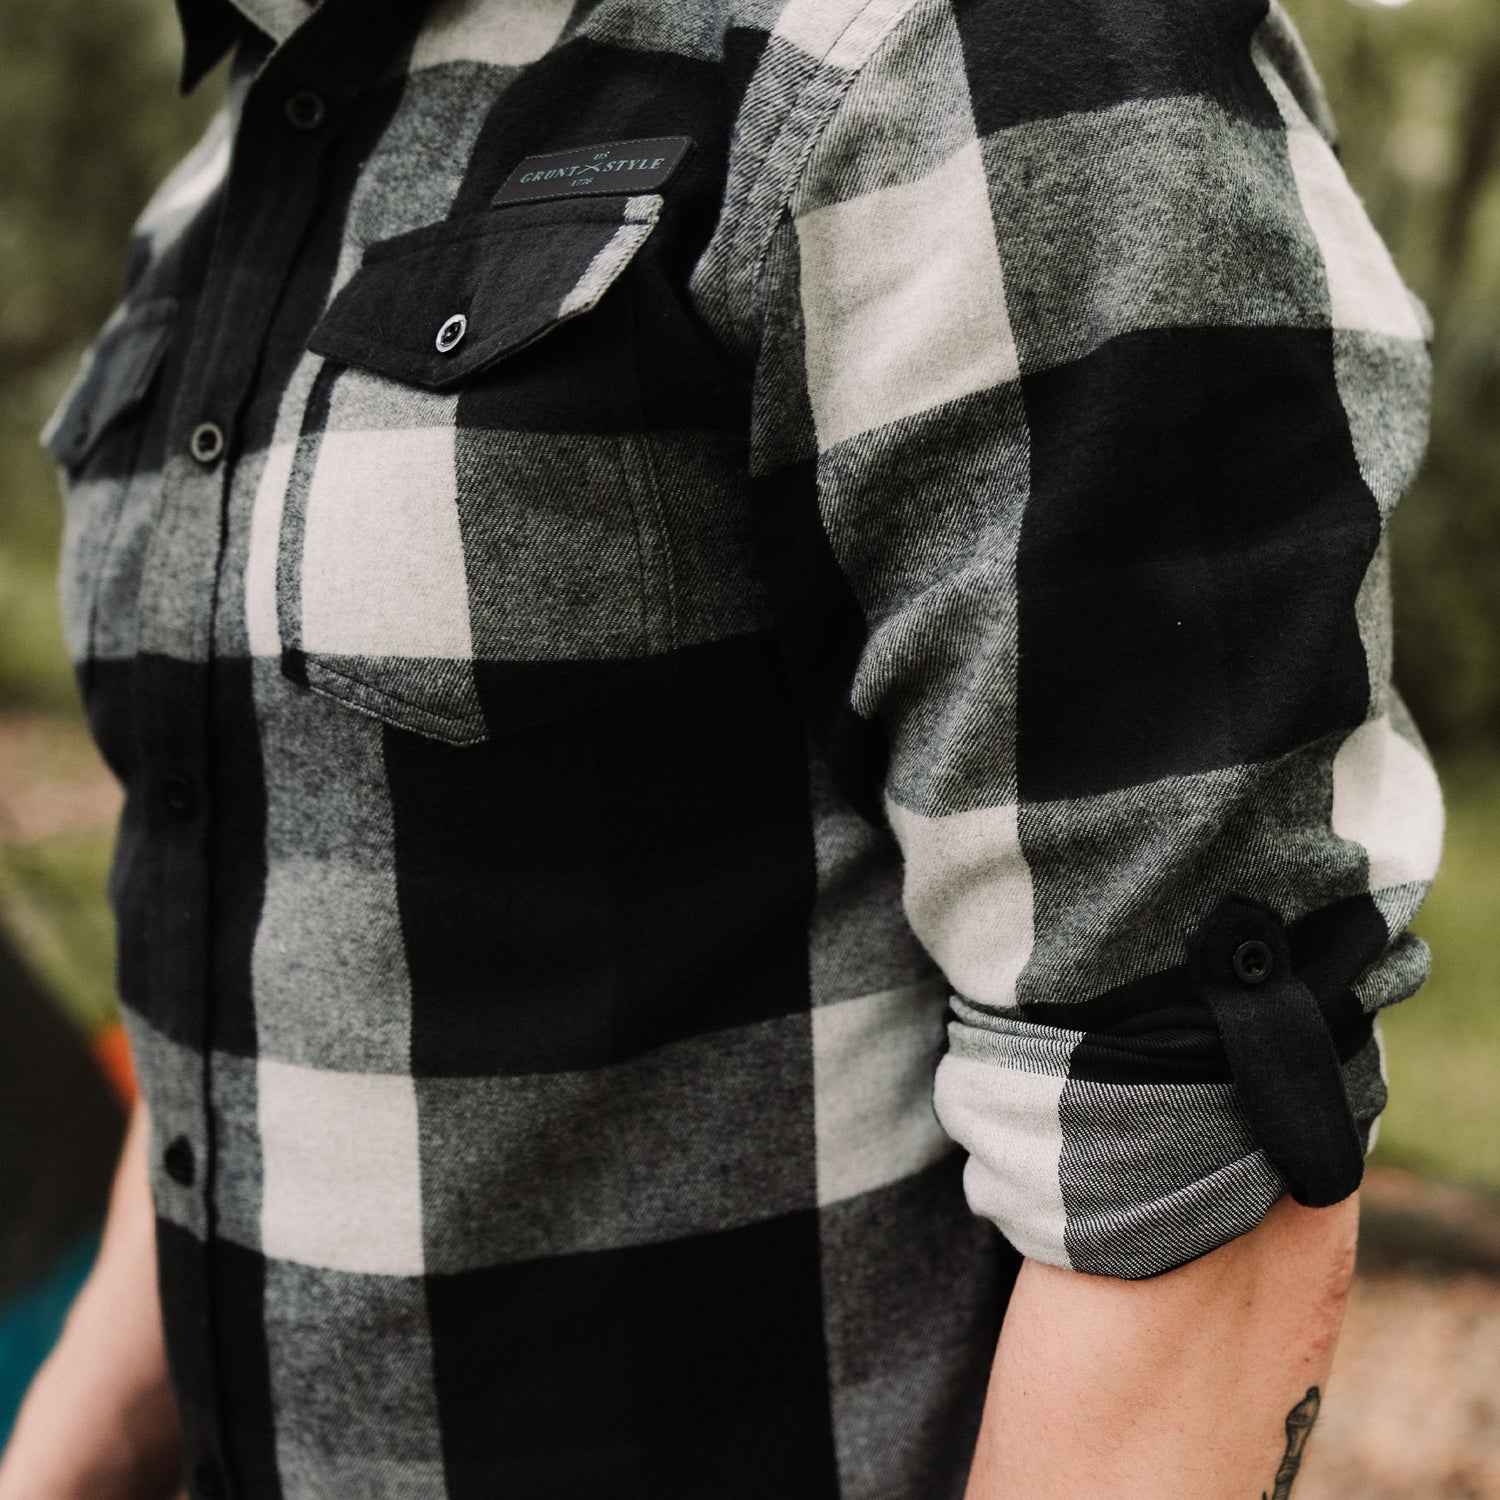 Black and White Men's Flannel | Grunt Style 